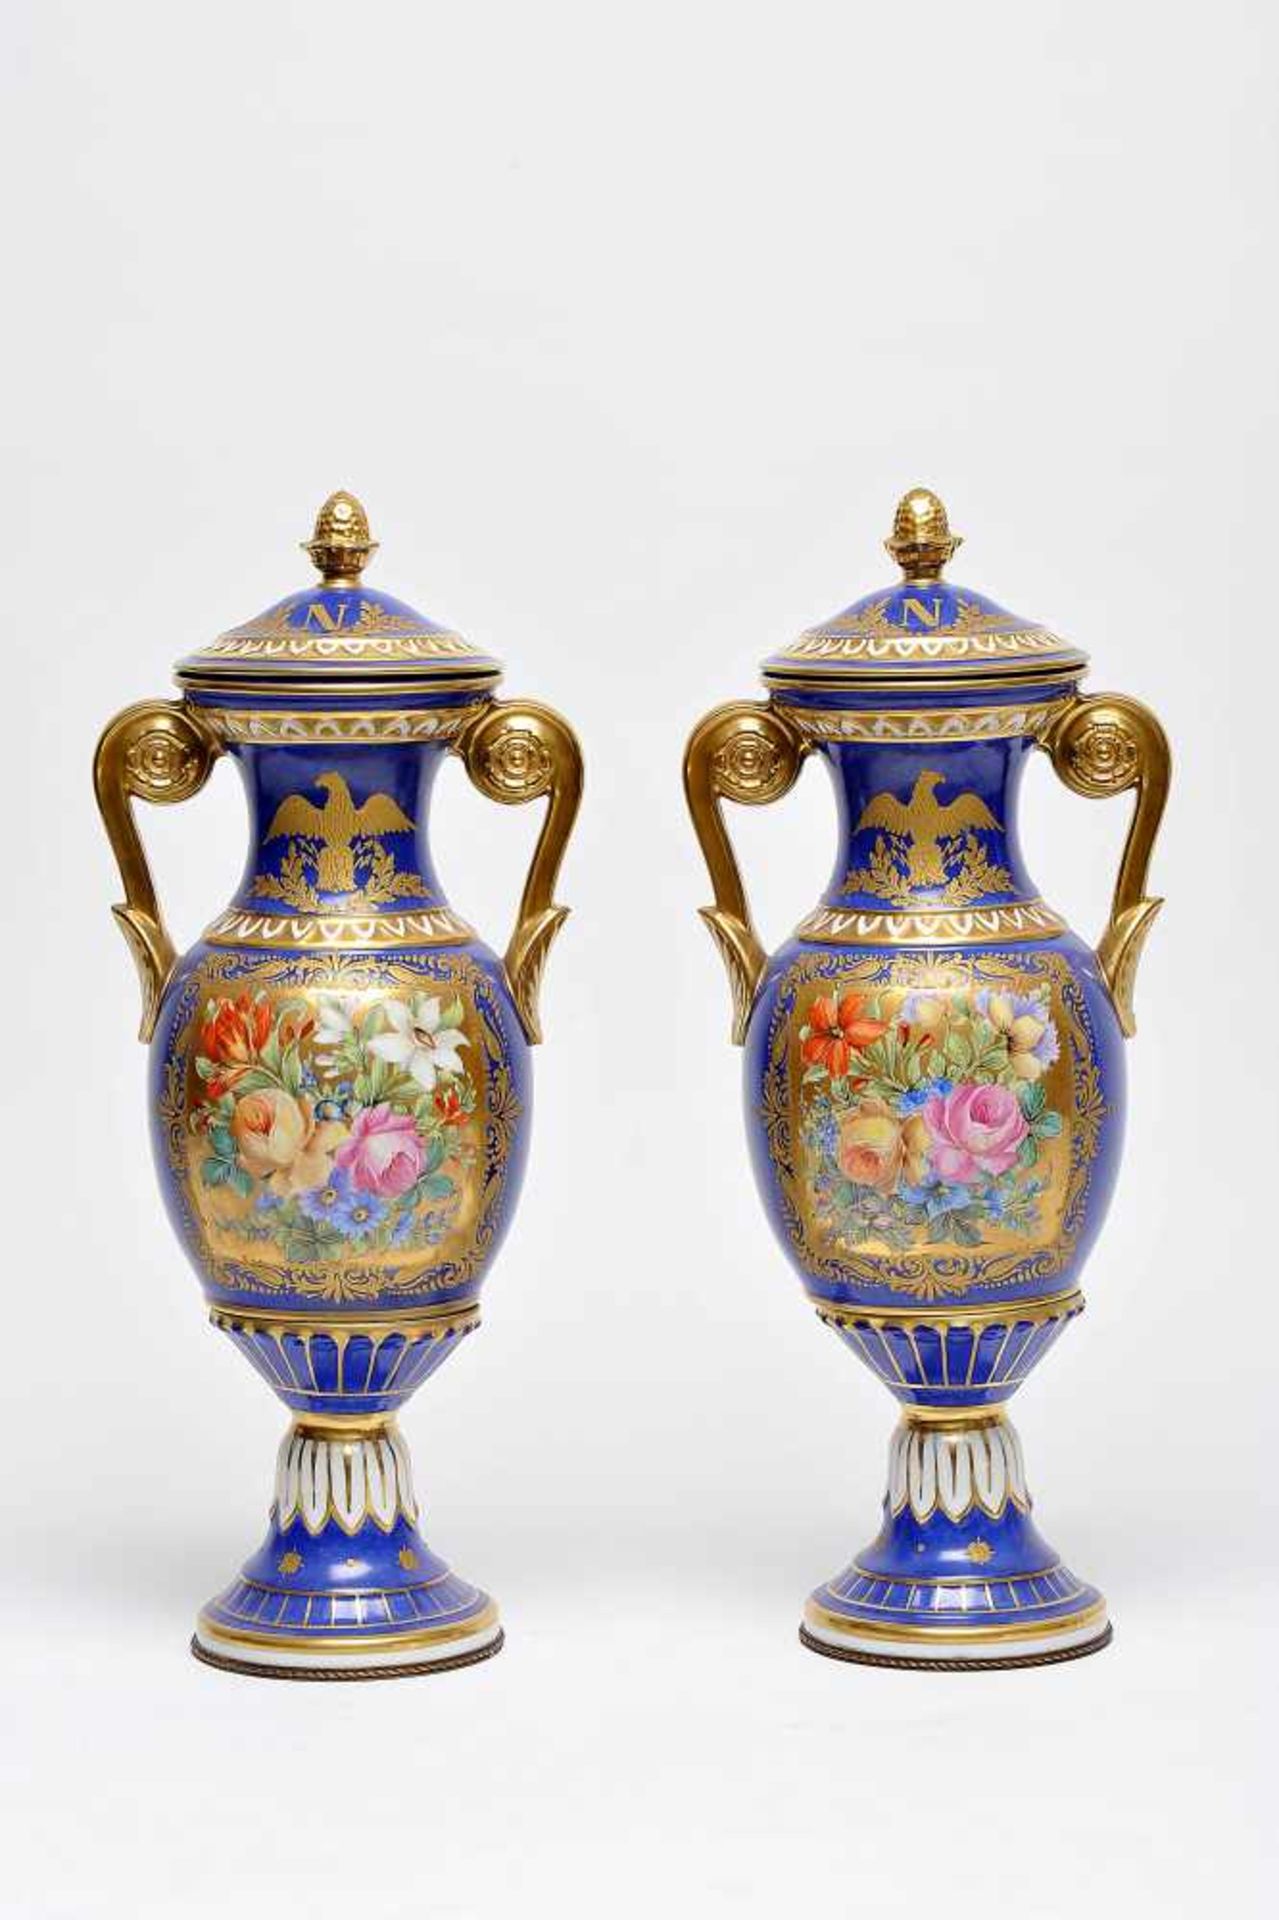 A Pair of Covered Urns, Sèvres porcelain, blue and gilt decoration "Eagle" and "N" (for Napoleon),